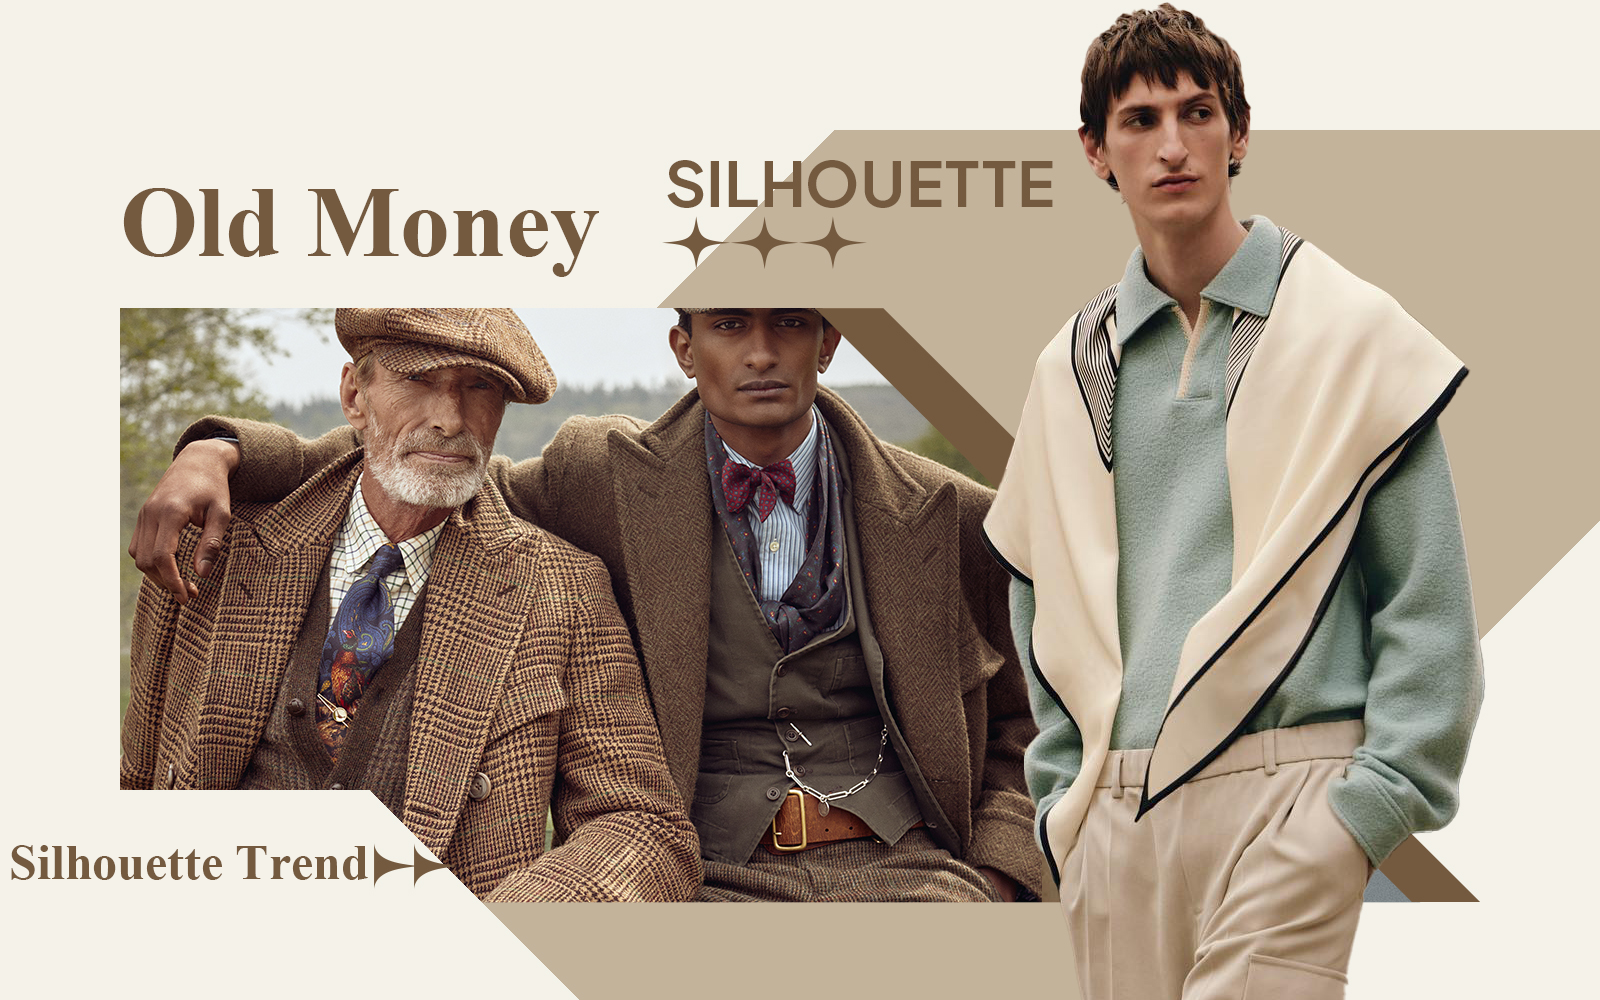 Classic Old Money -- The Silhouette Trend for Menswear